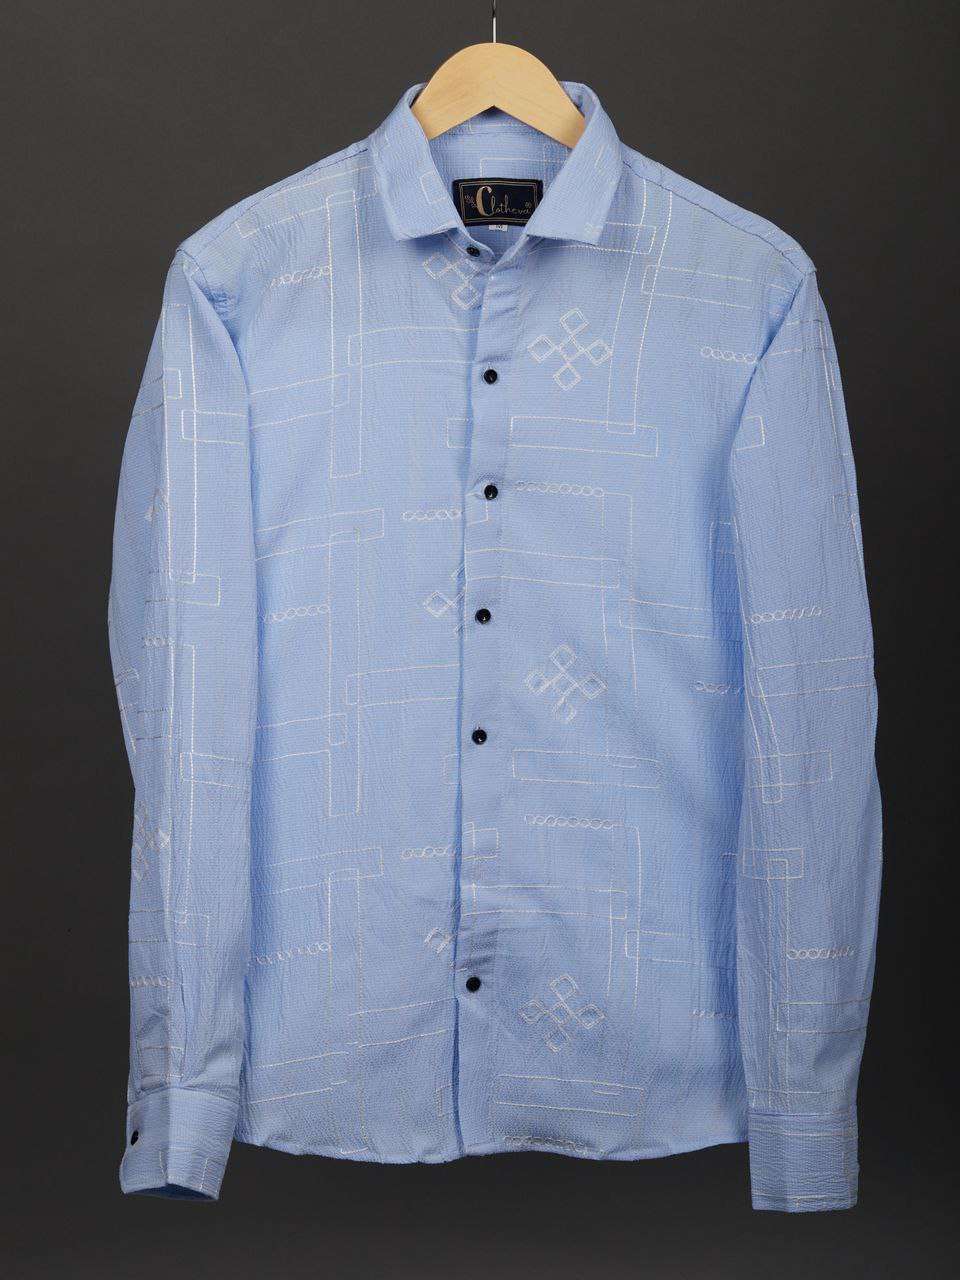 COTTON EMBROIDERY PLEASENT SHIRTS FOR MEN AT WHOLESALE RATES...